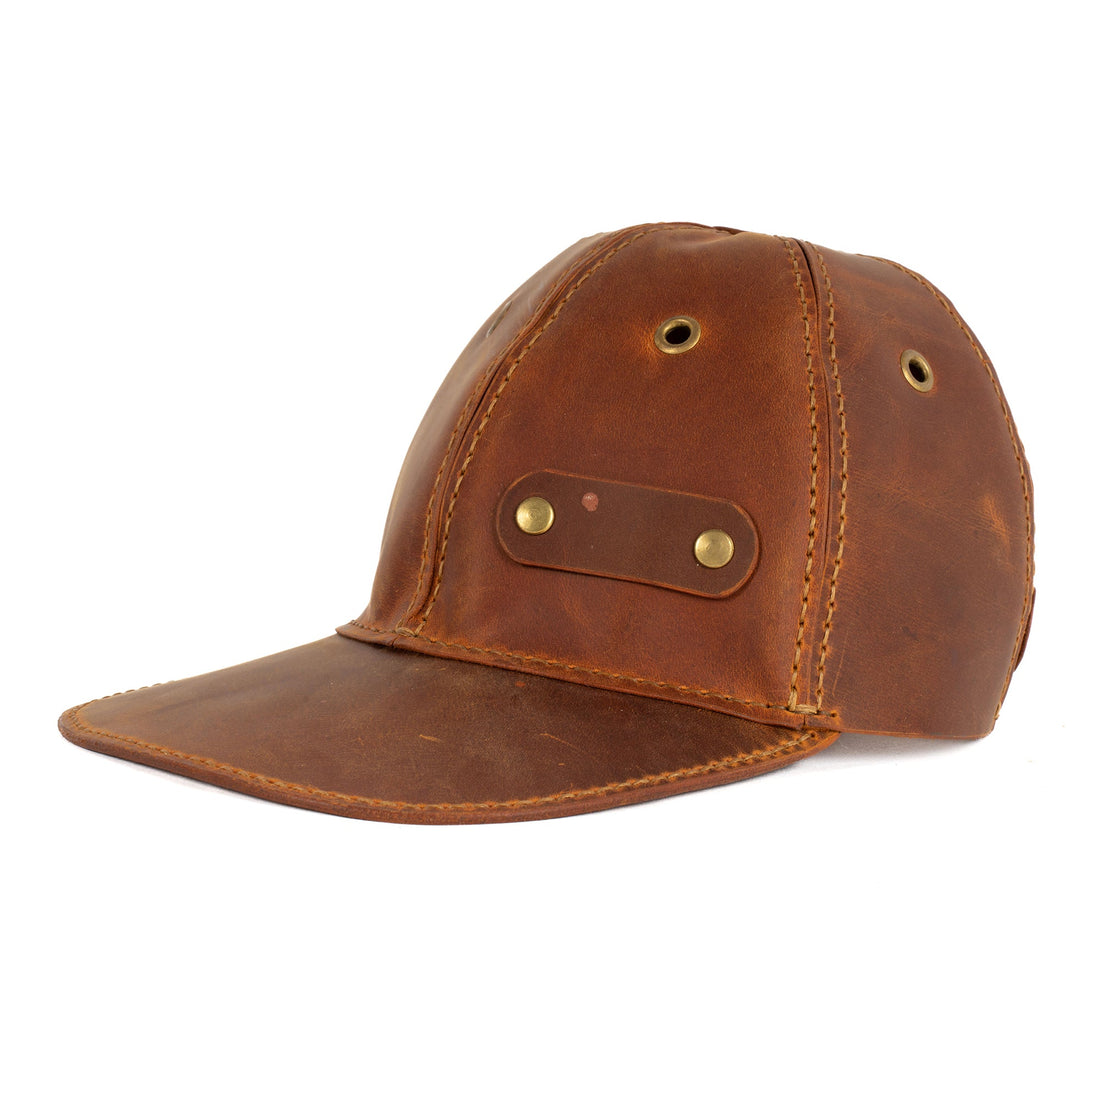 Maui Tan Leather Hat - Small: 52 cm - Accessories Zengoda Shop online from Artisan Brands